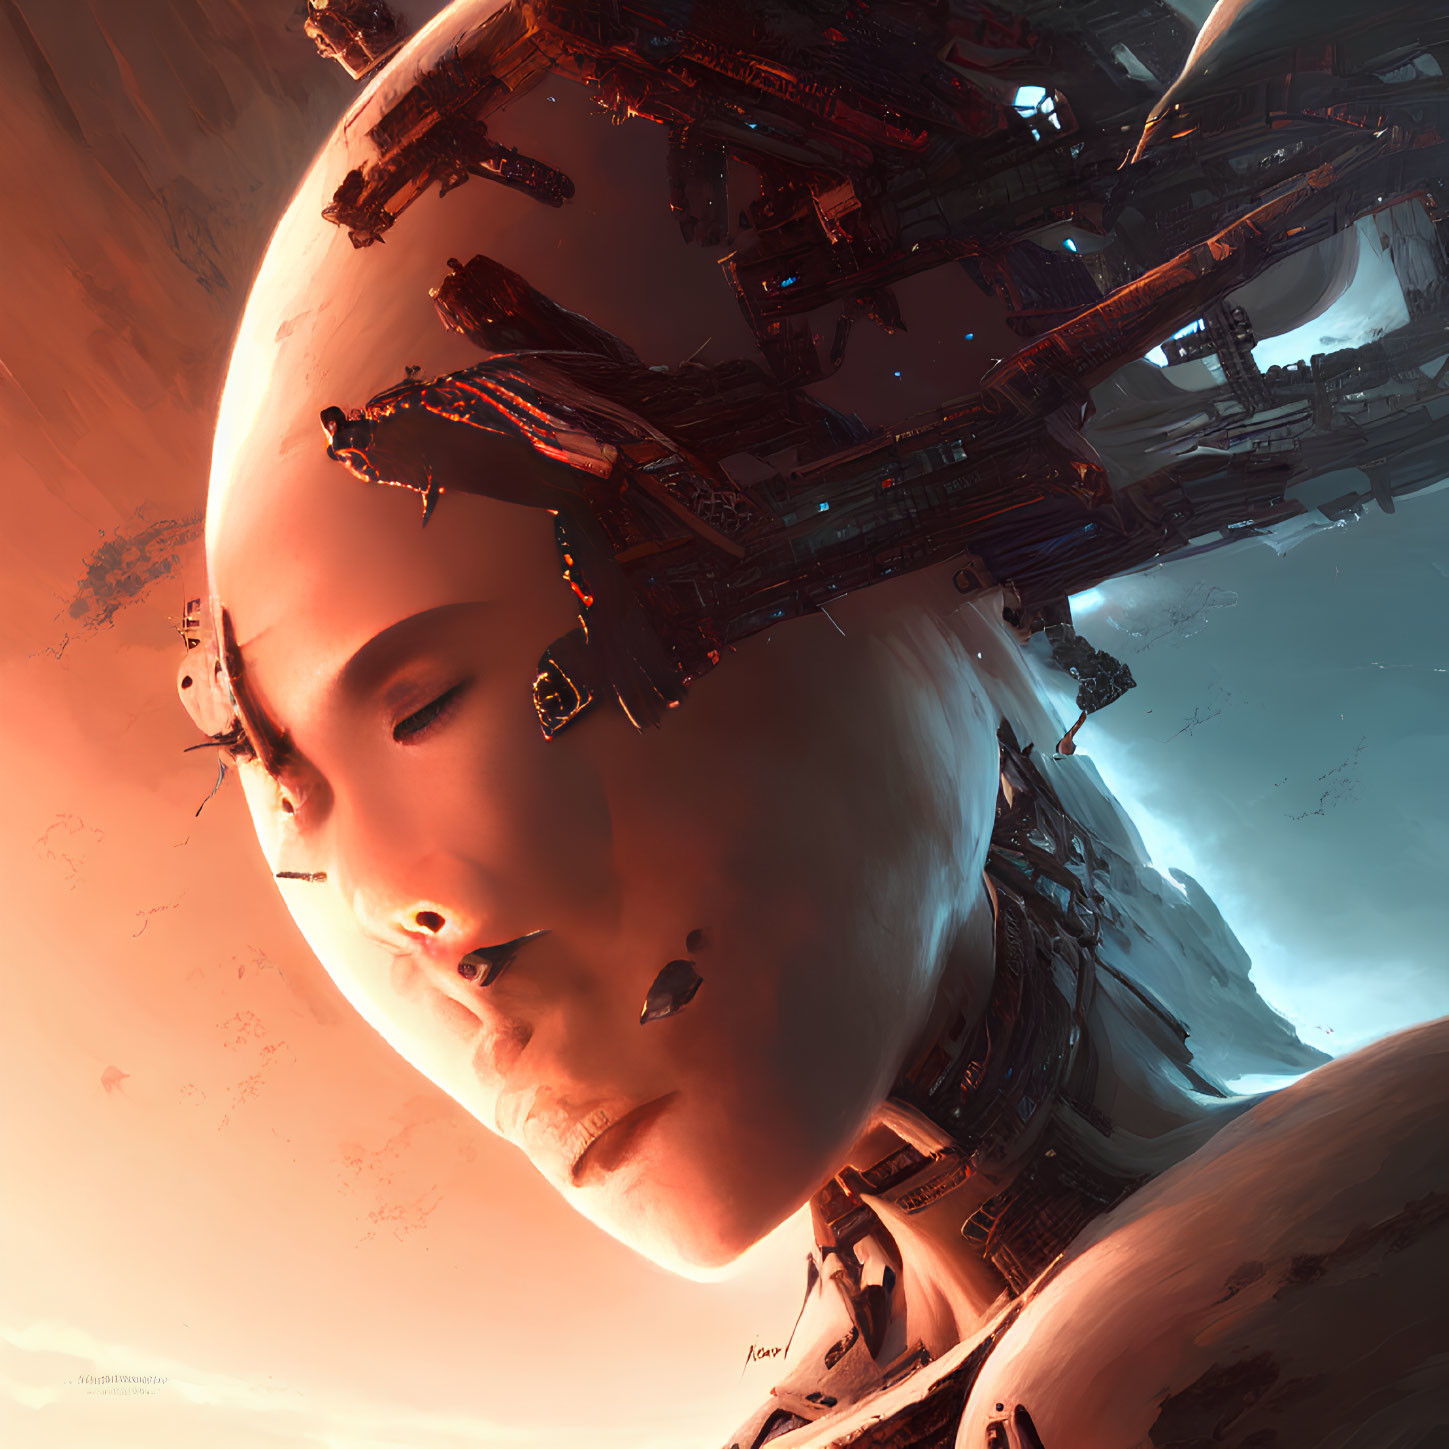 Surreal sci-fi artwork: giant humanoid face merged with mechanical structures